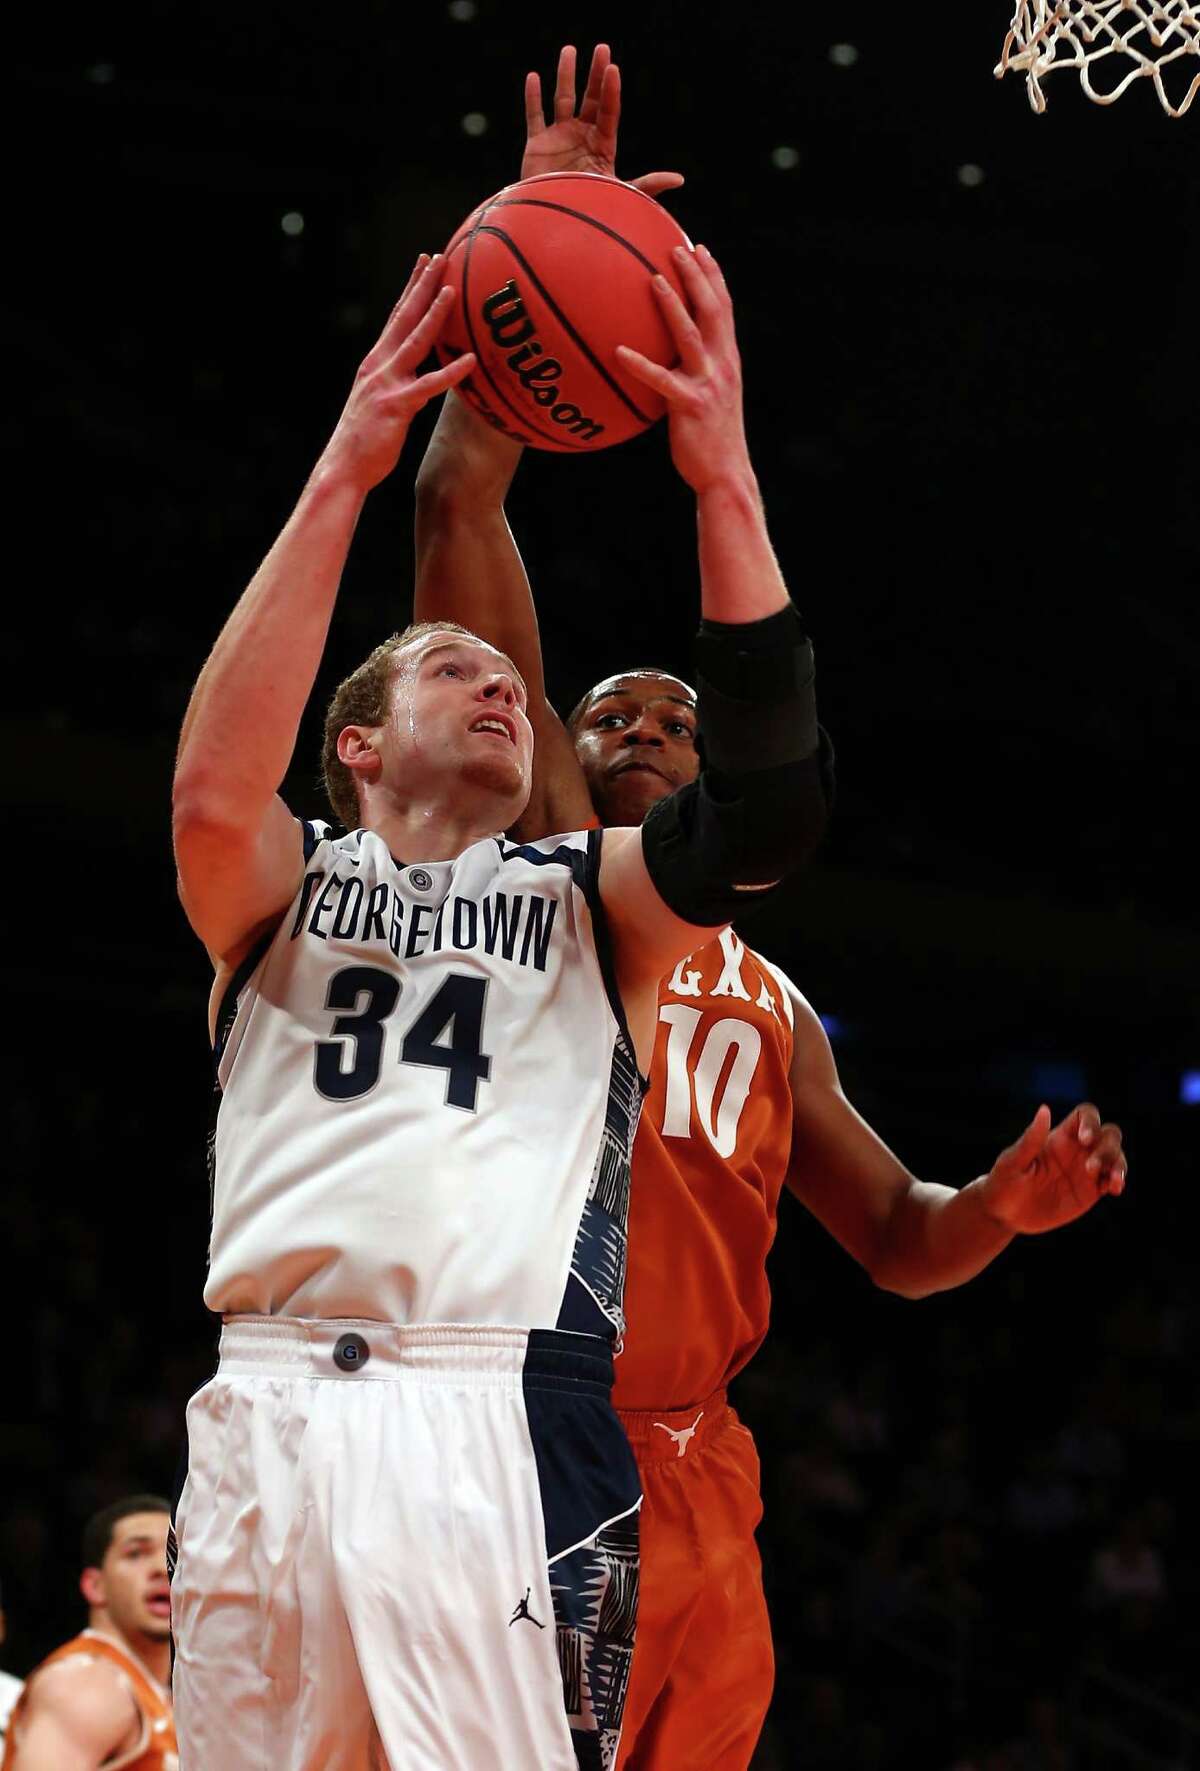 Nate Lubick #34 of the Georgetown Hoyas takes a shot as Jonathan Holmes #10 of the Texas Longhorns defends during the Jimmy V Classic on December 4, 2012 at Madison Square Garden in New York City.